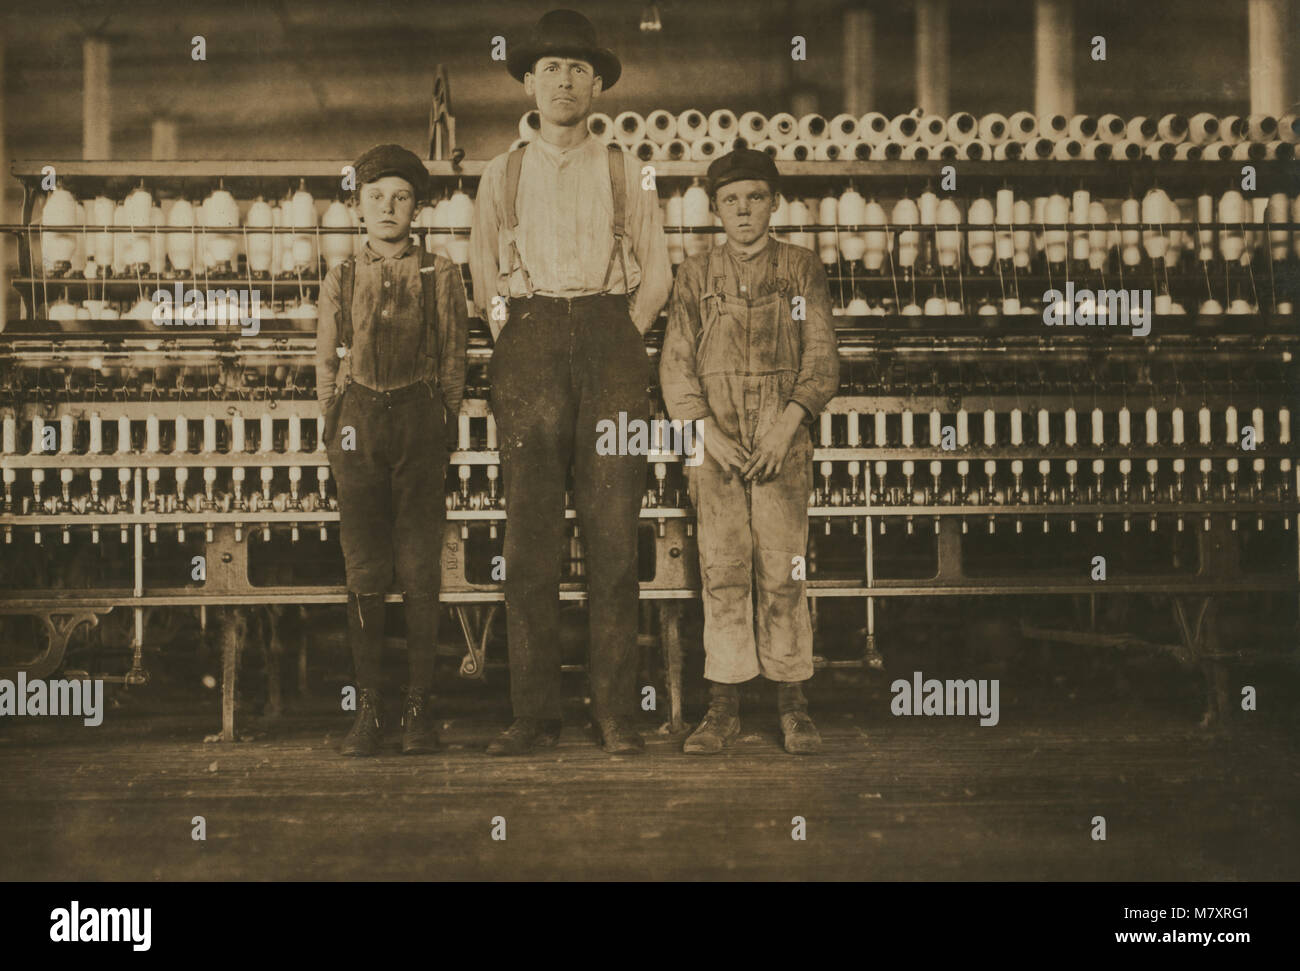 Overseer and Two Doffer Boys, Full-length Portrait, Avondale Cotton Mills, Birmingham, Alabama, USA, Lewis Hine for National Child Labor Committee, November 1910 Stock Photo